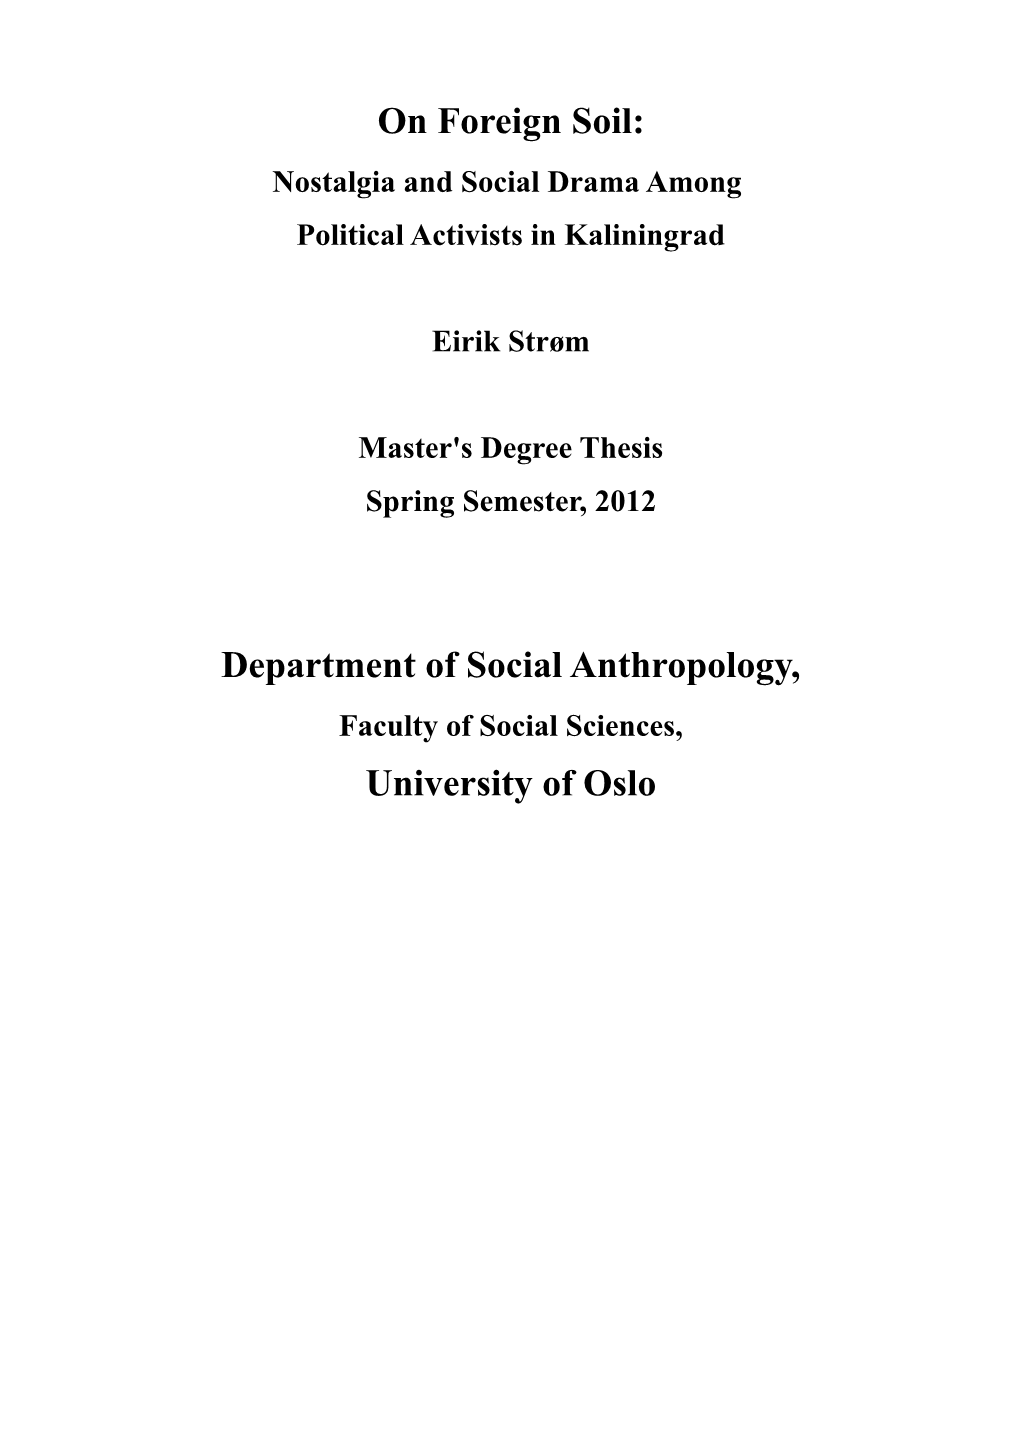 Department of Social Anthropology, University of Oslo